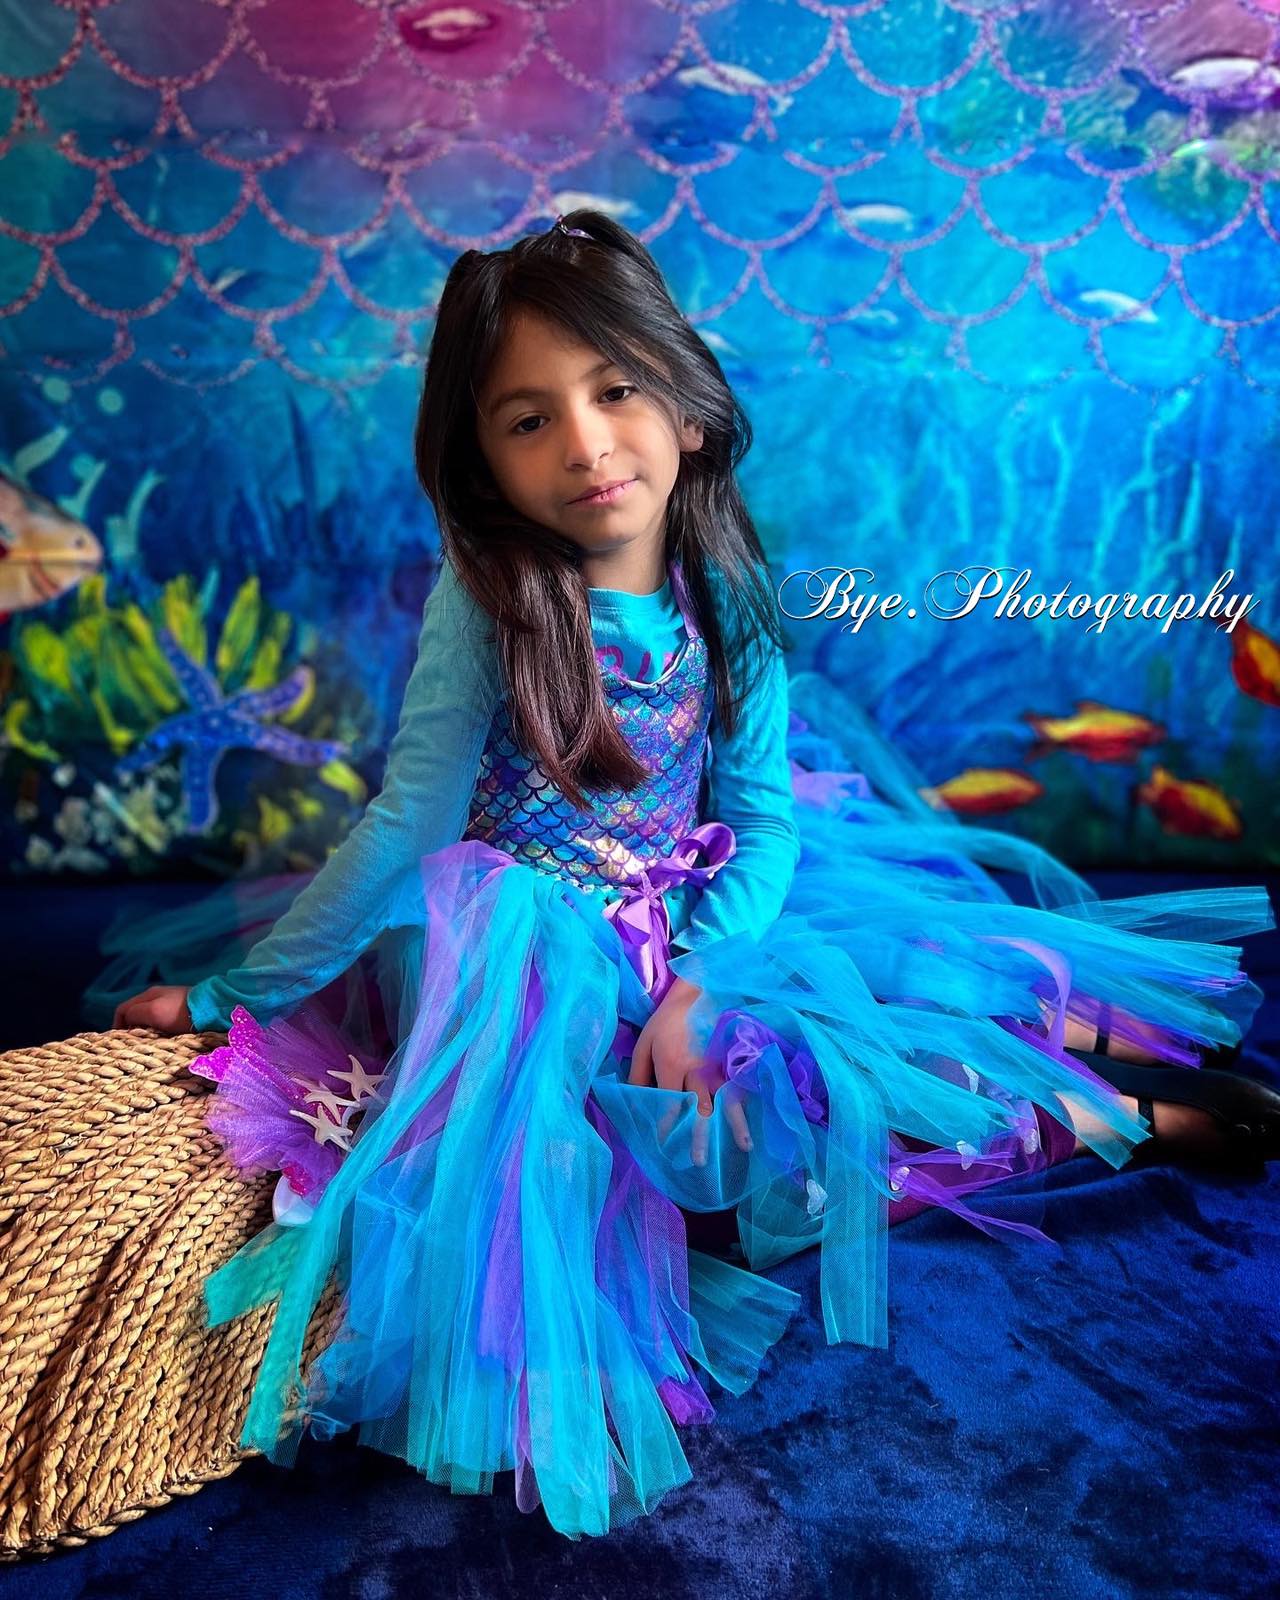 Kate Summer Undersea Mermaid Pearls Backdrop for Photography